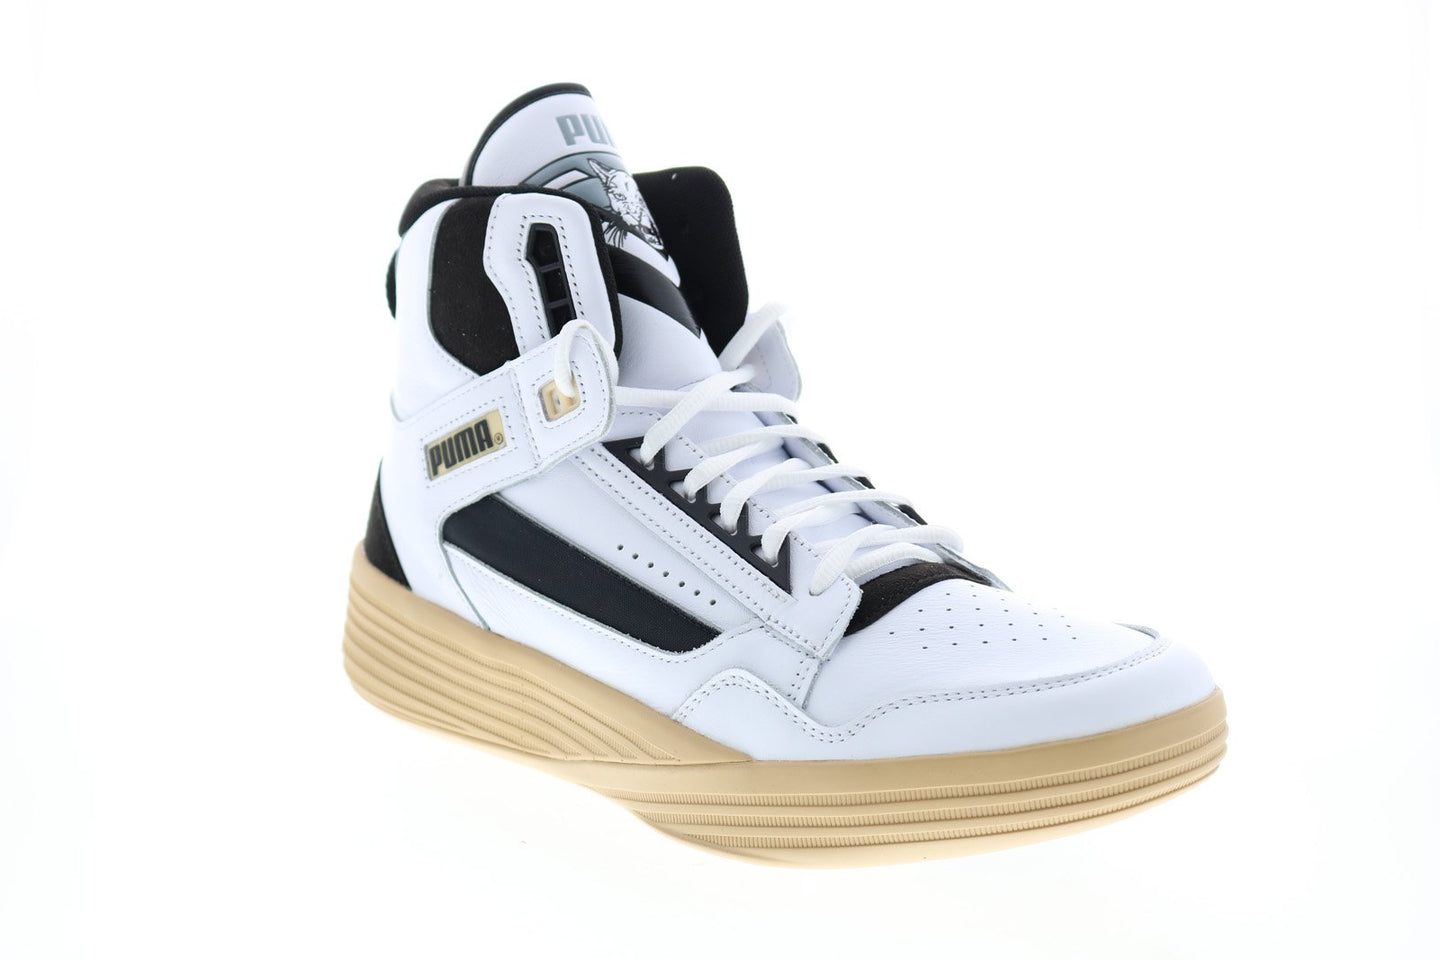 Puma Clyde All-Pro Kuzma Mid 19483601 Mens White Athletic Basketball S ...